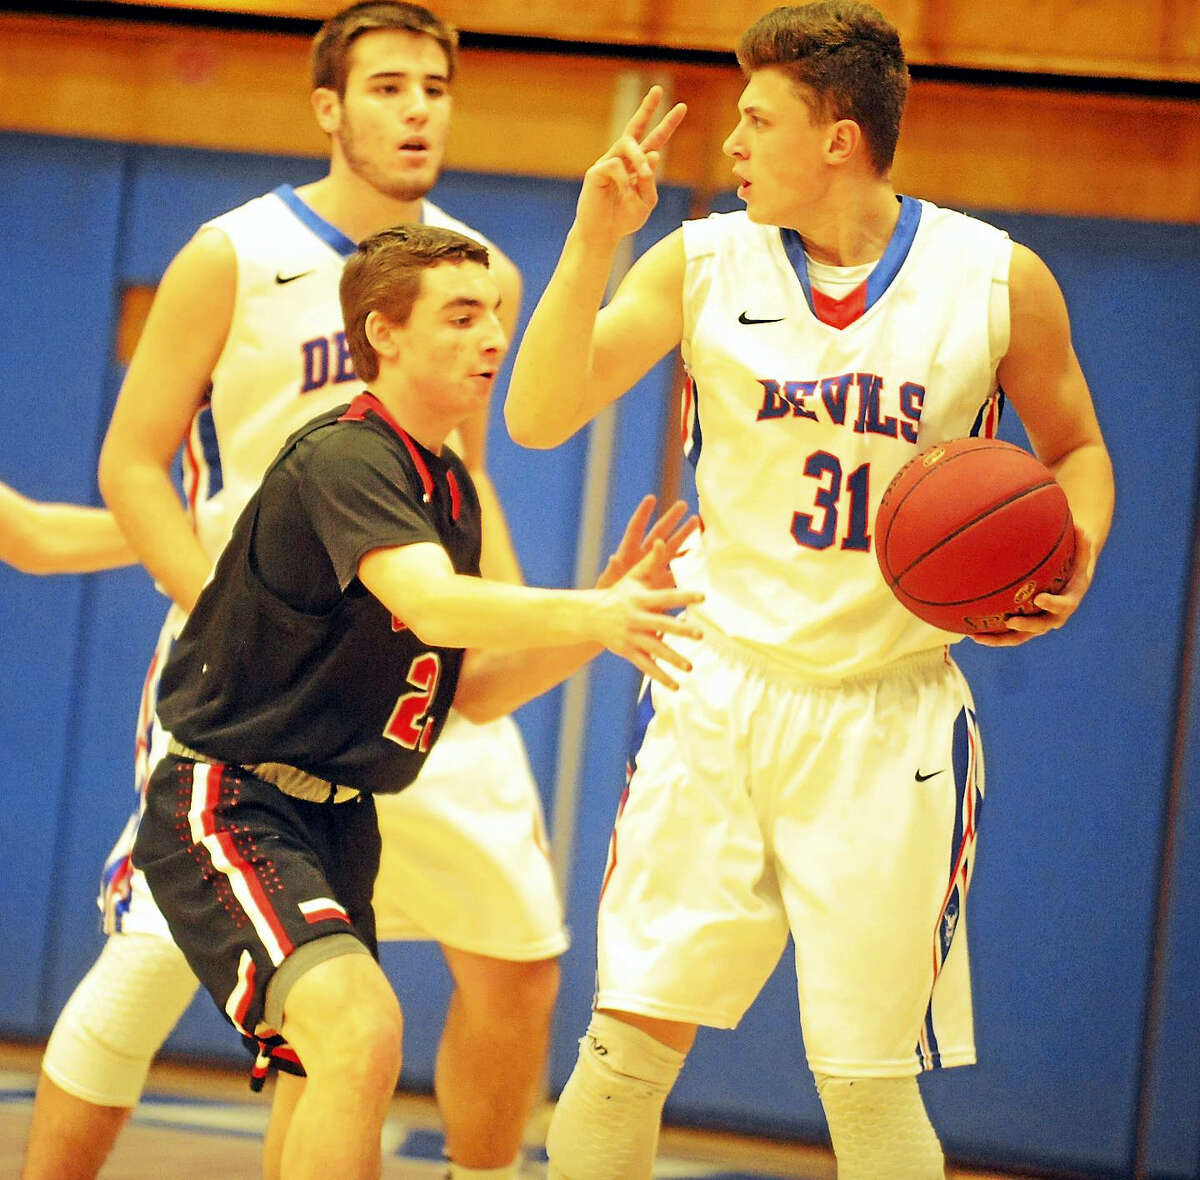 Coginchaug junior Hunter Jameson calls the play while being guarded by Cromwell’s David Dewey on Friday.